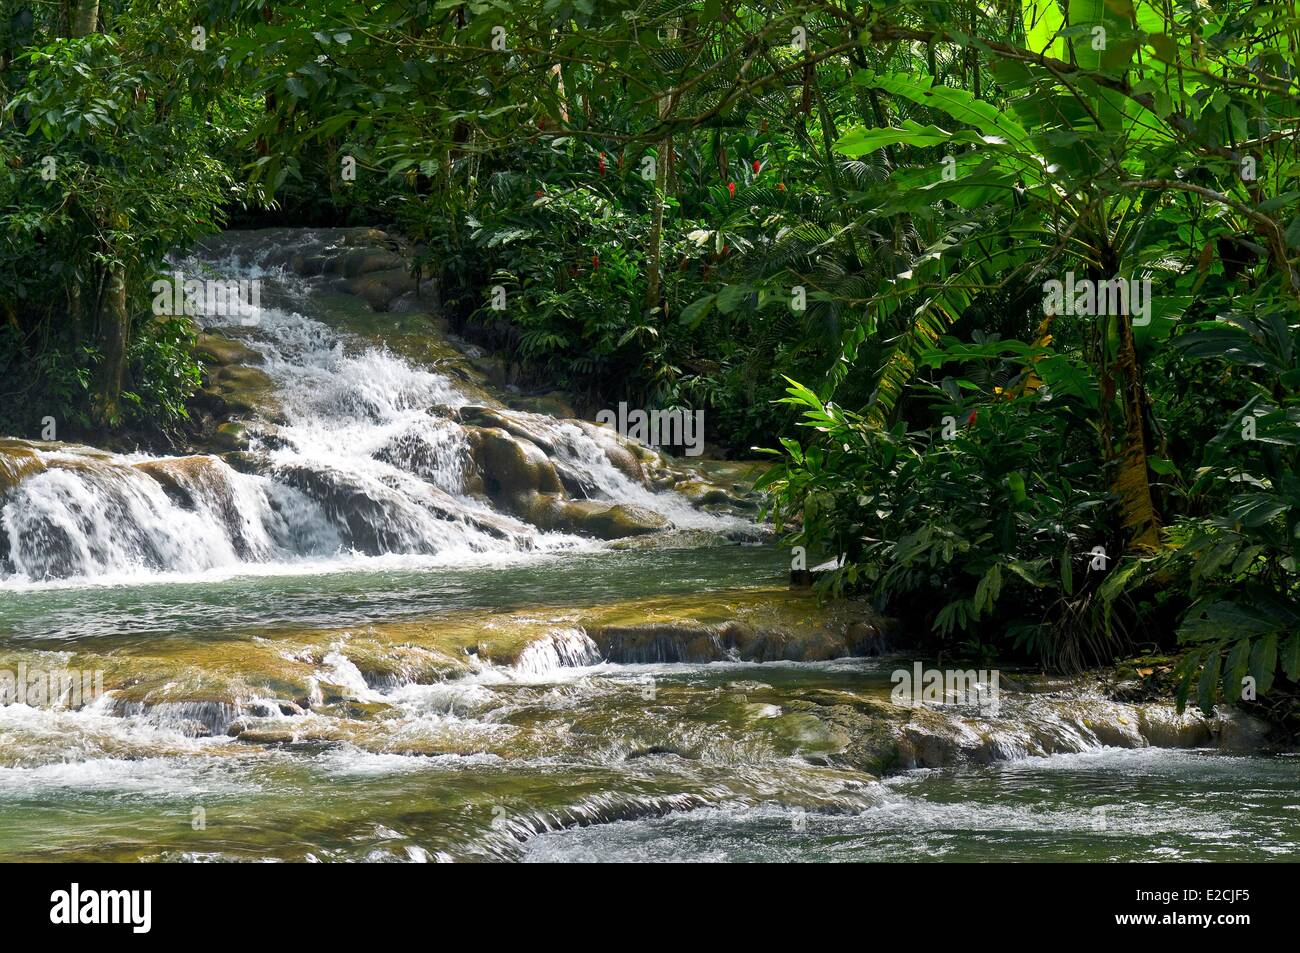 Jamaica, West Indies, St Ann parish on noth coast, river and water falls of Dunn's River fall Stock Photo